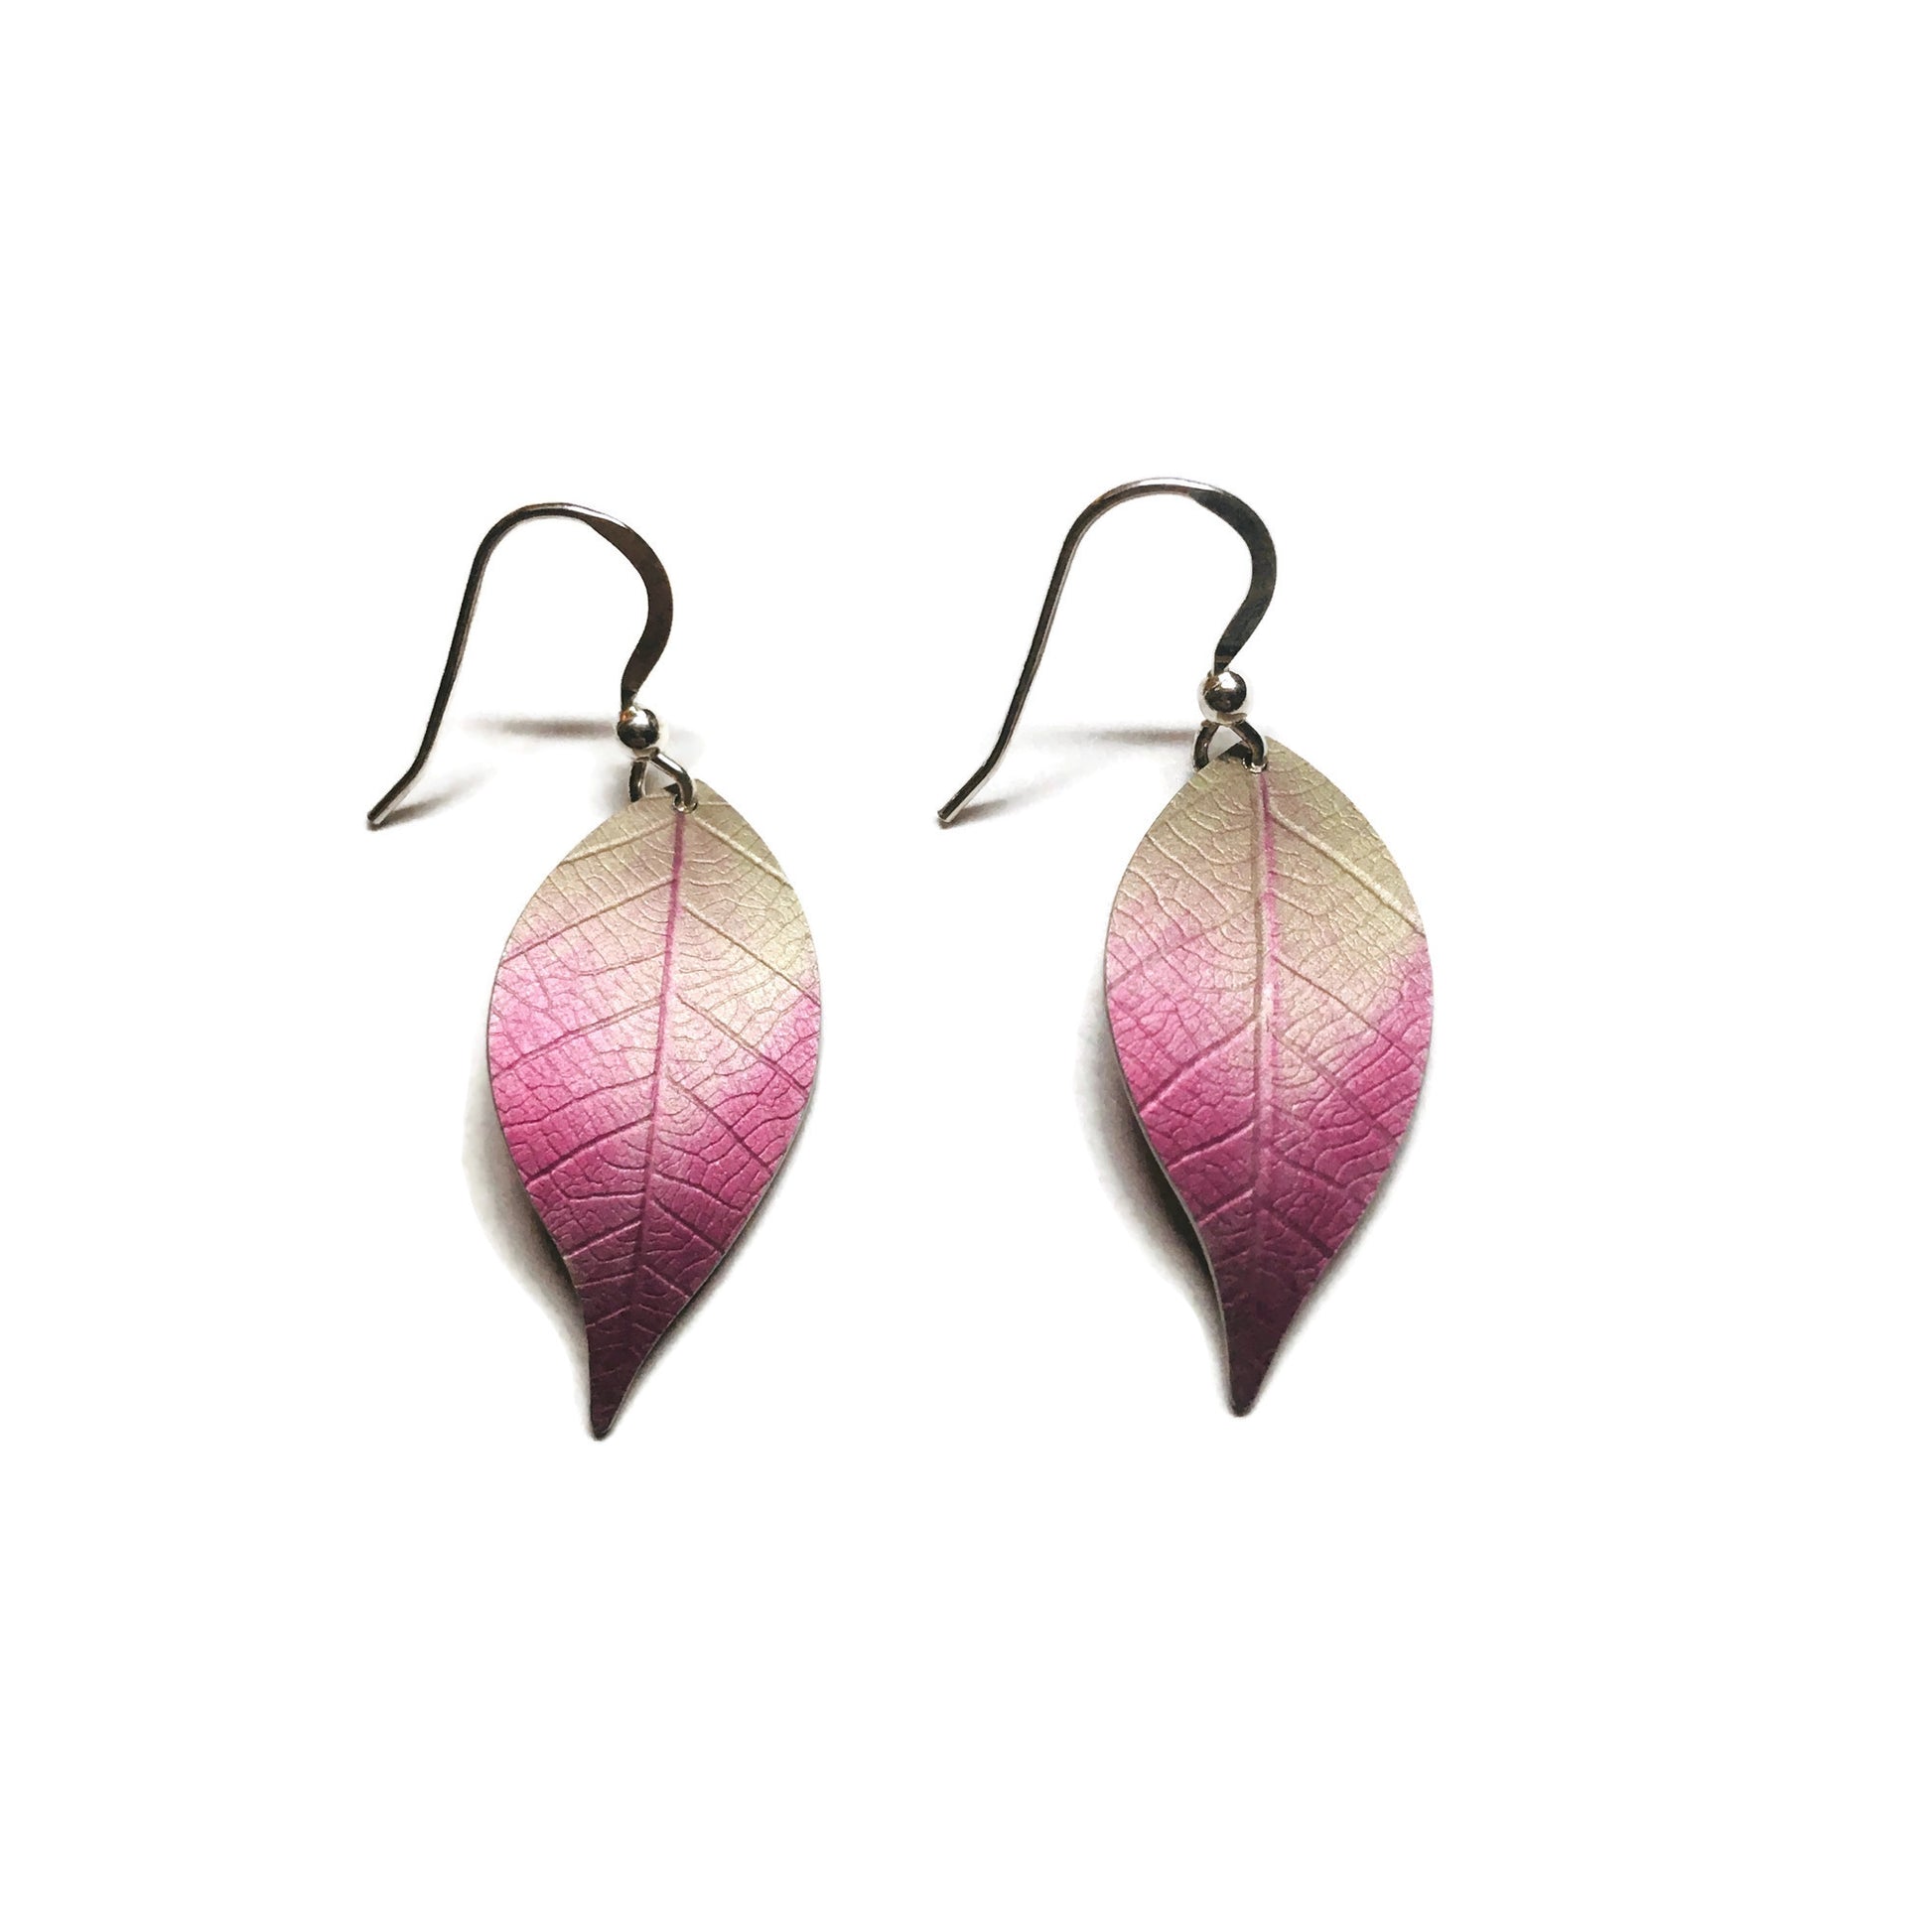 Pink Cherry leaf earrings by Photofinish Jewellery